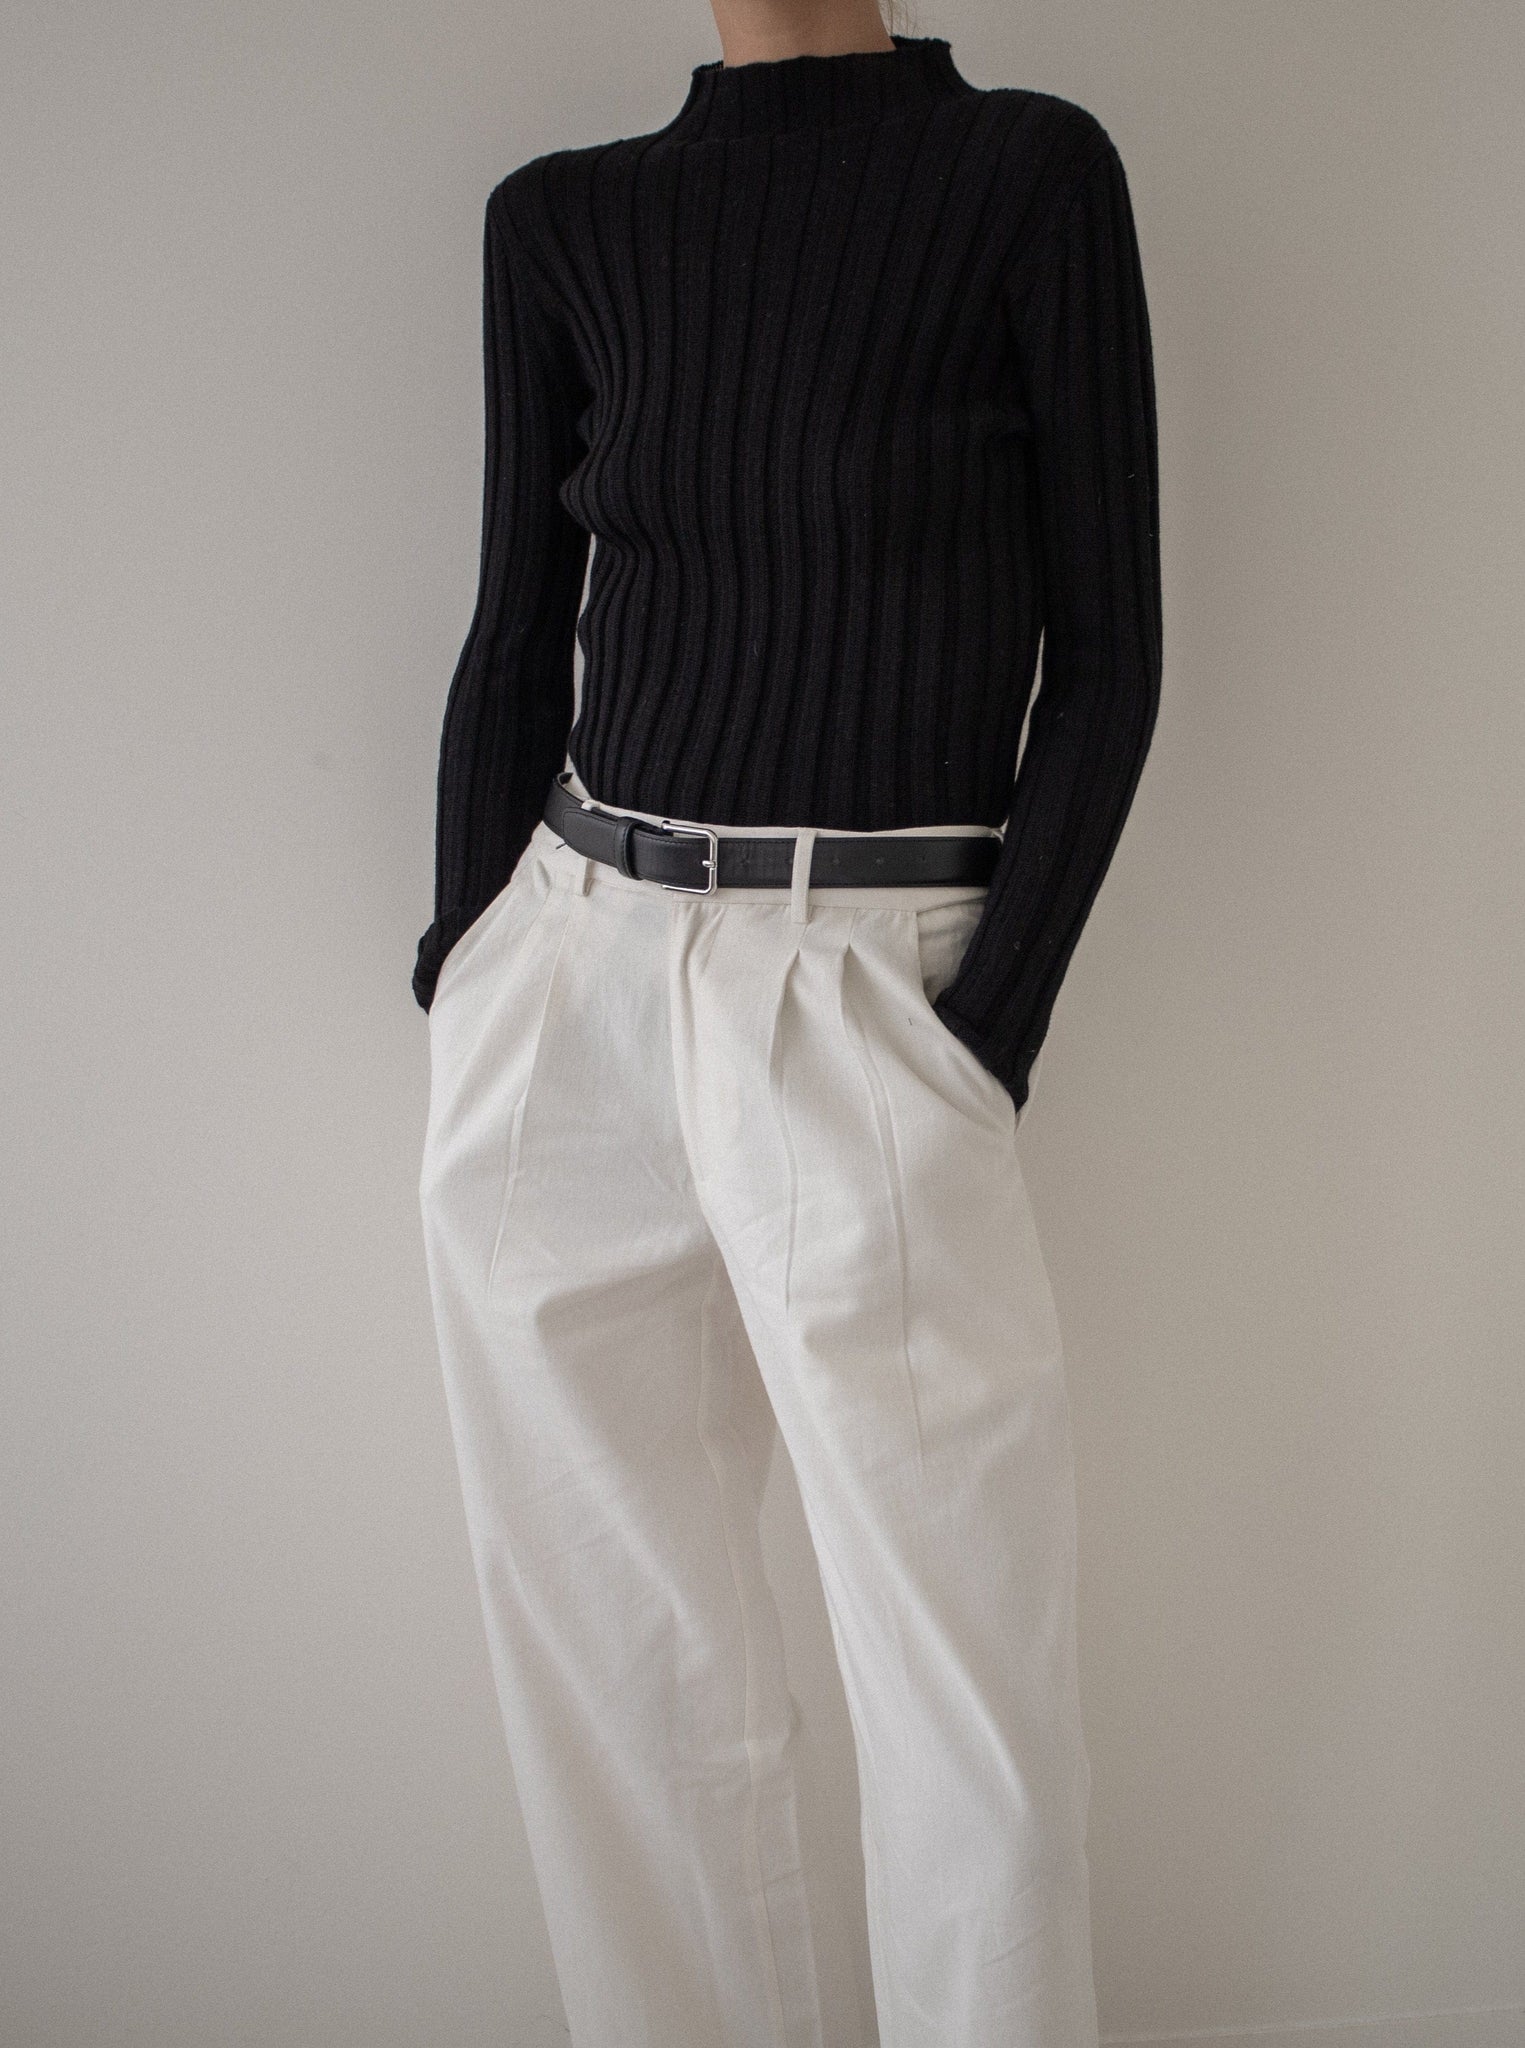 A woman wearing a Soa Ribbed Turtleneck - Black sweater and ethically-sourced white pants.